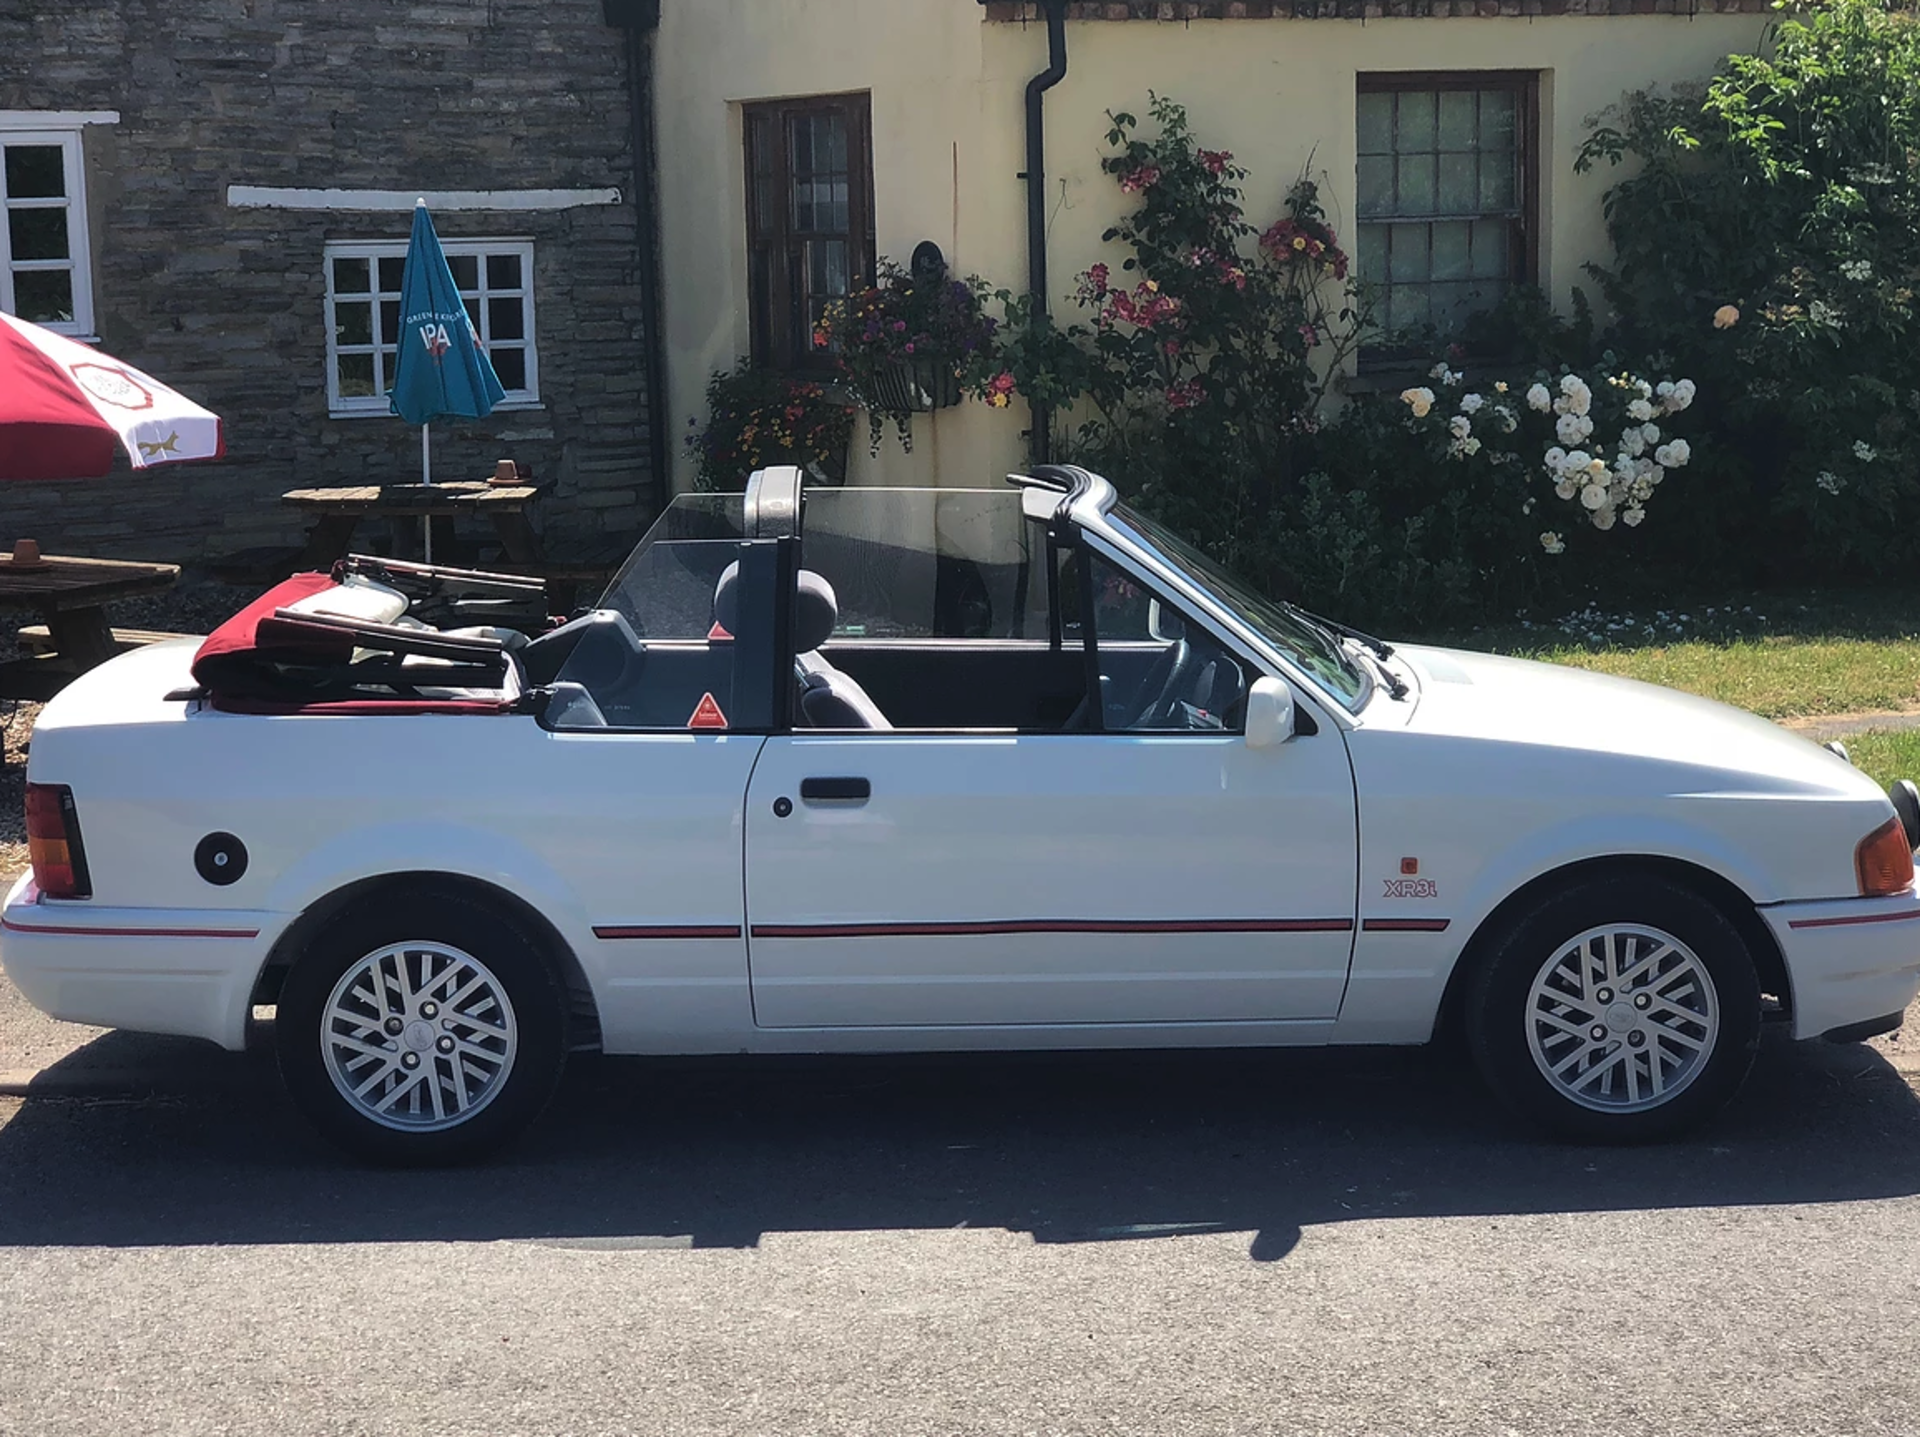 1989 Ford Escort XR3i Convertible - Image 6 of 13